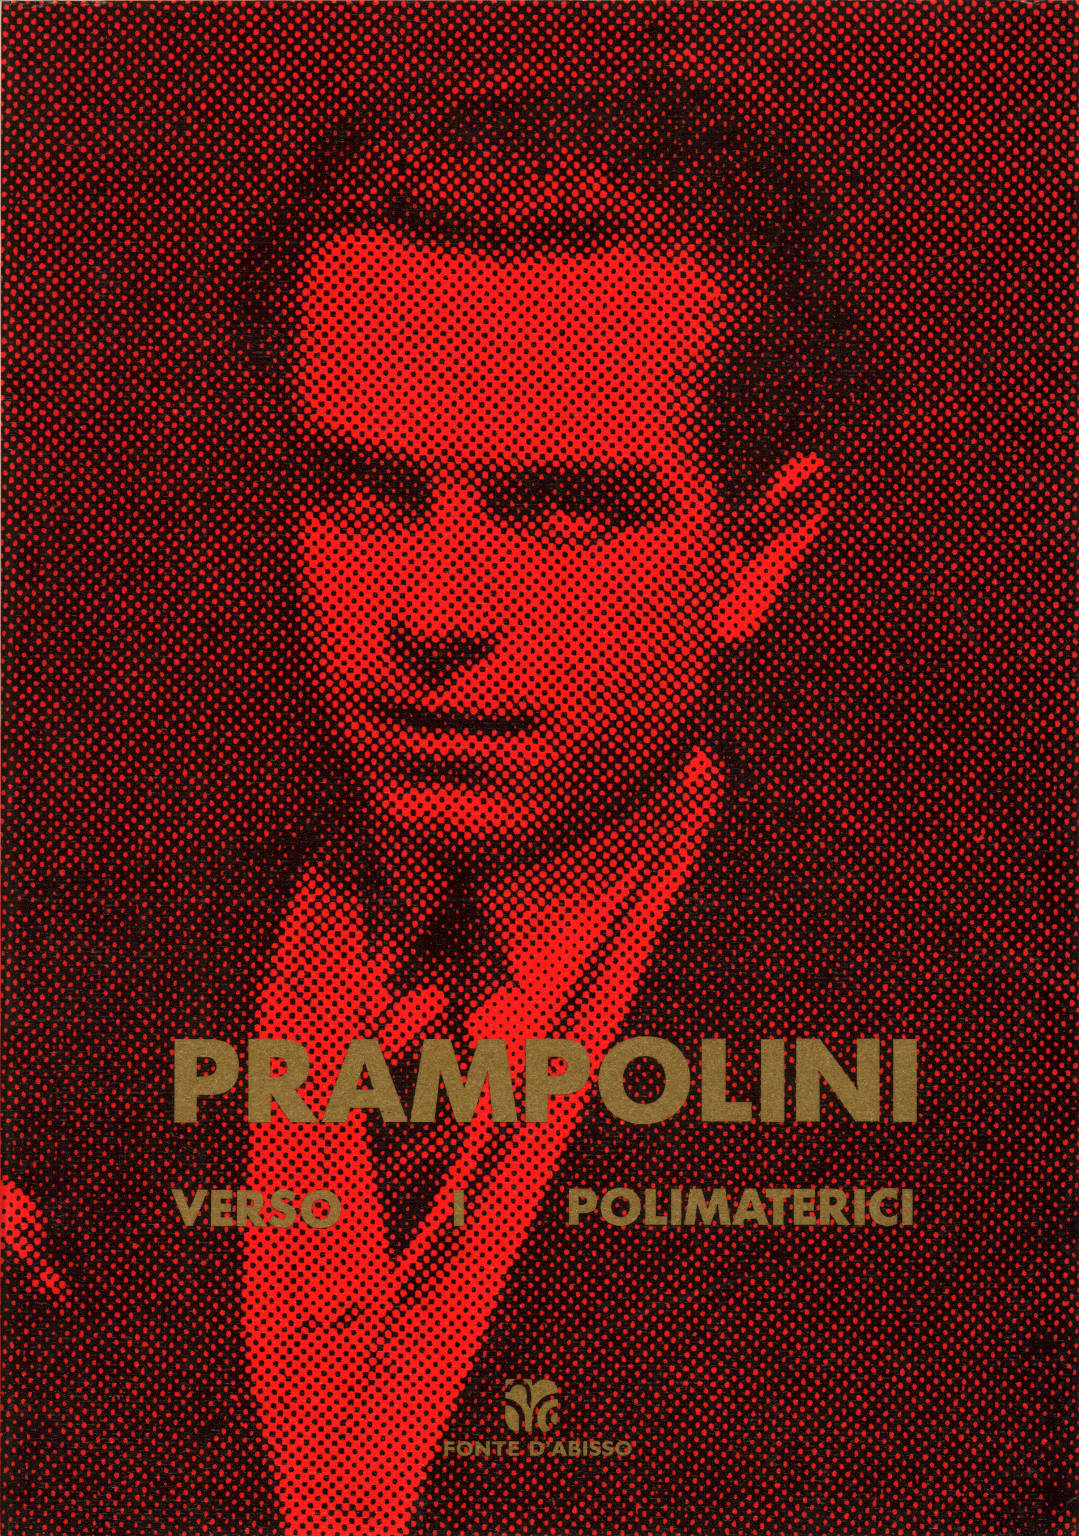 Prampolini to a variety of materials, the Guido Dance